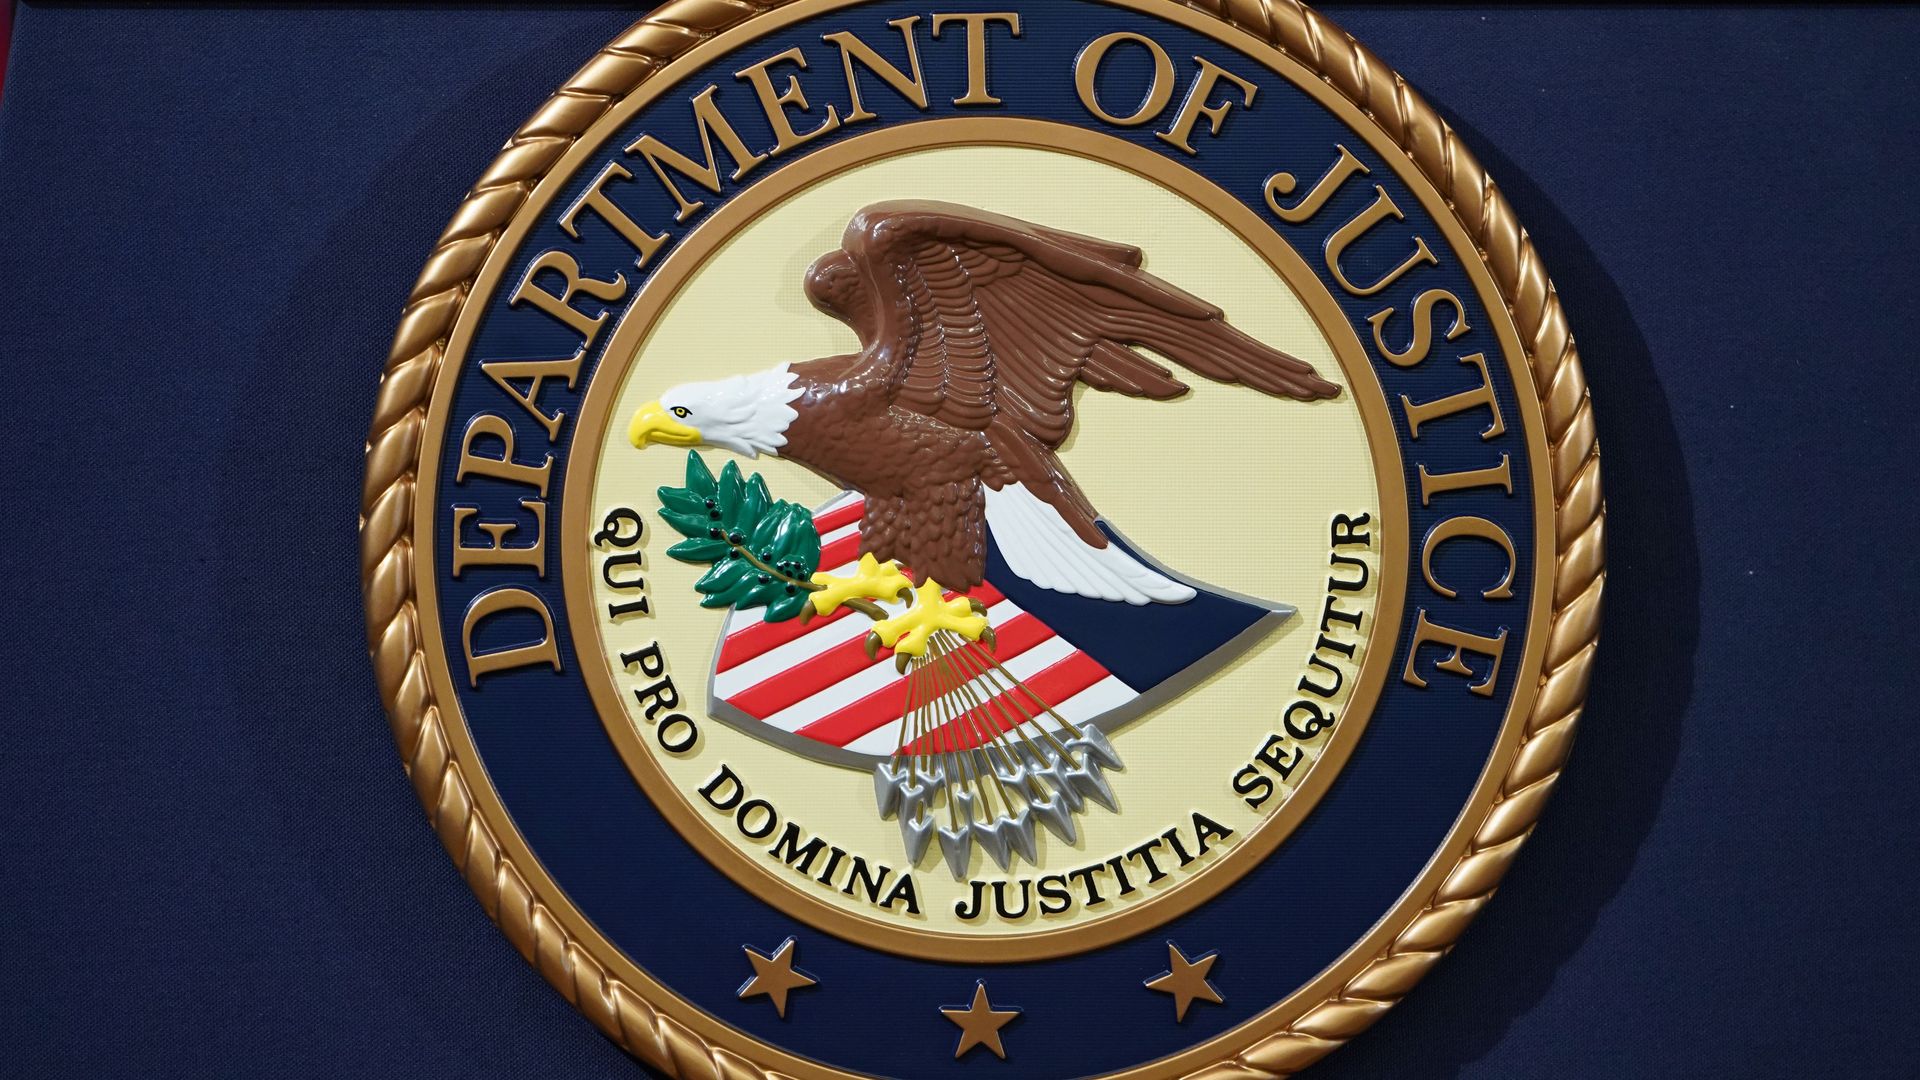 This image is a close-up of the Department of Justice seal.